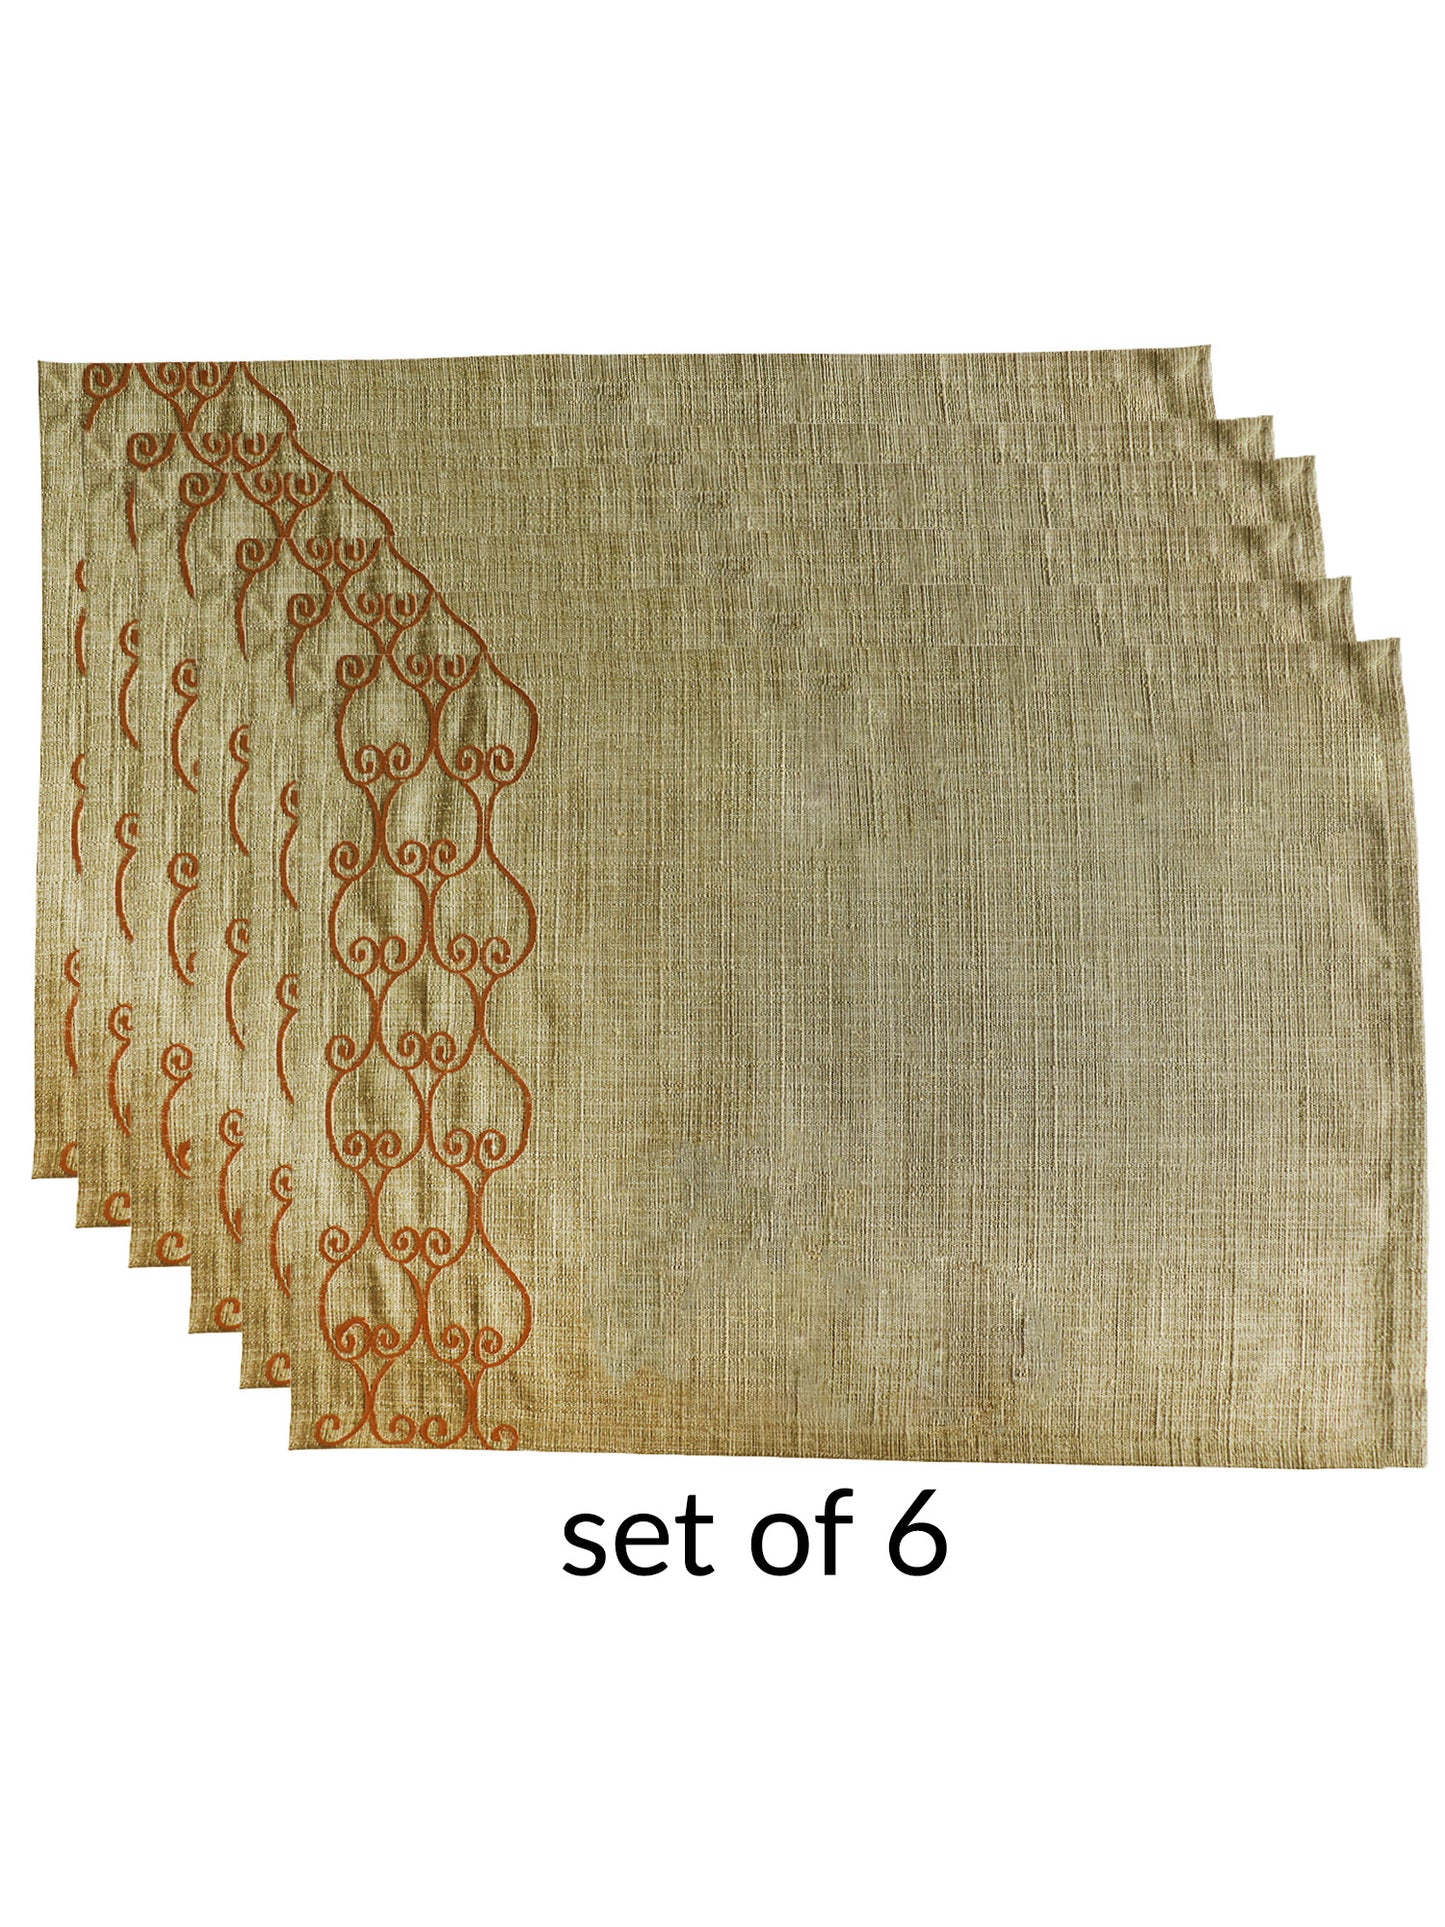 set of 6 embroidered mats in sage green color - 13x19 inch